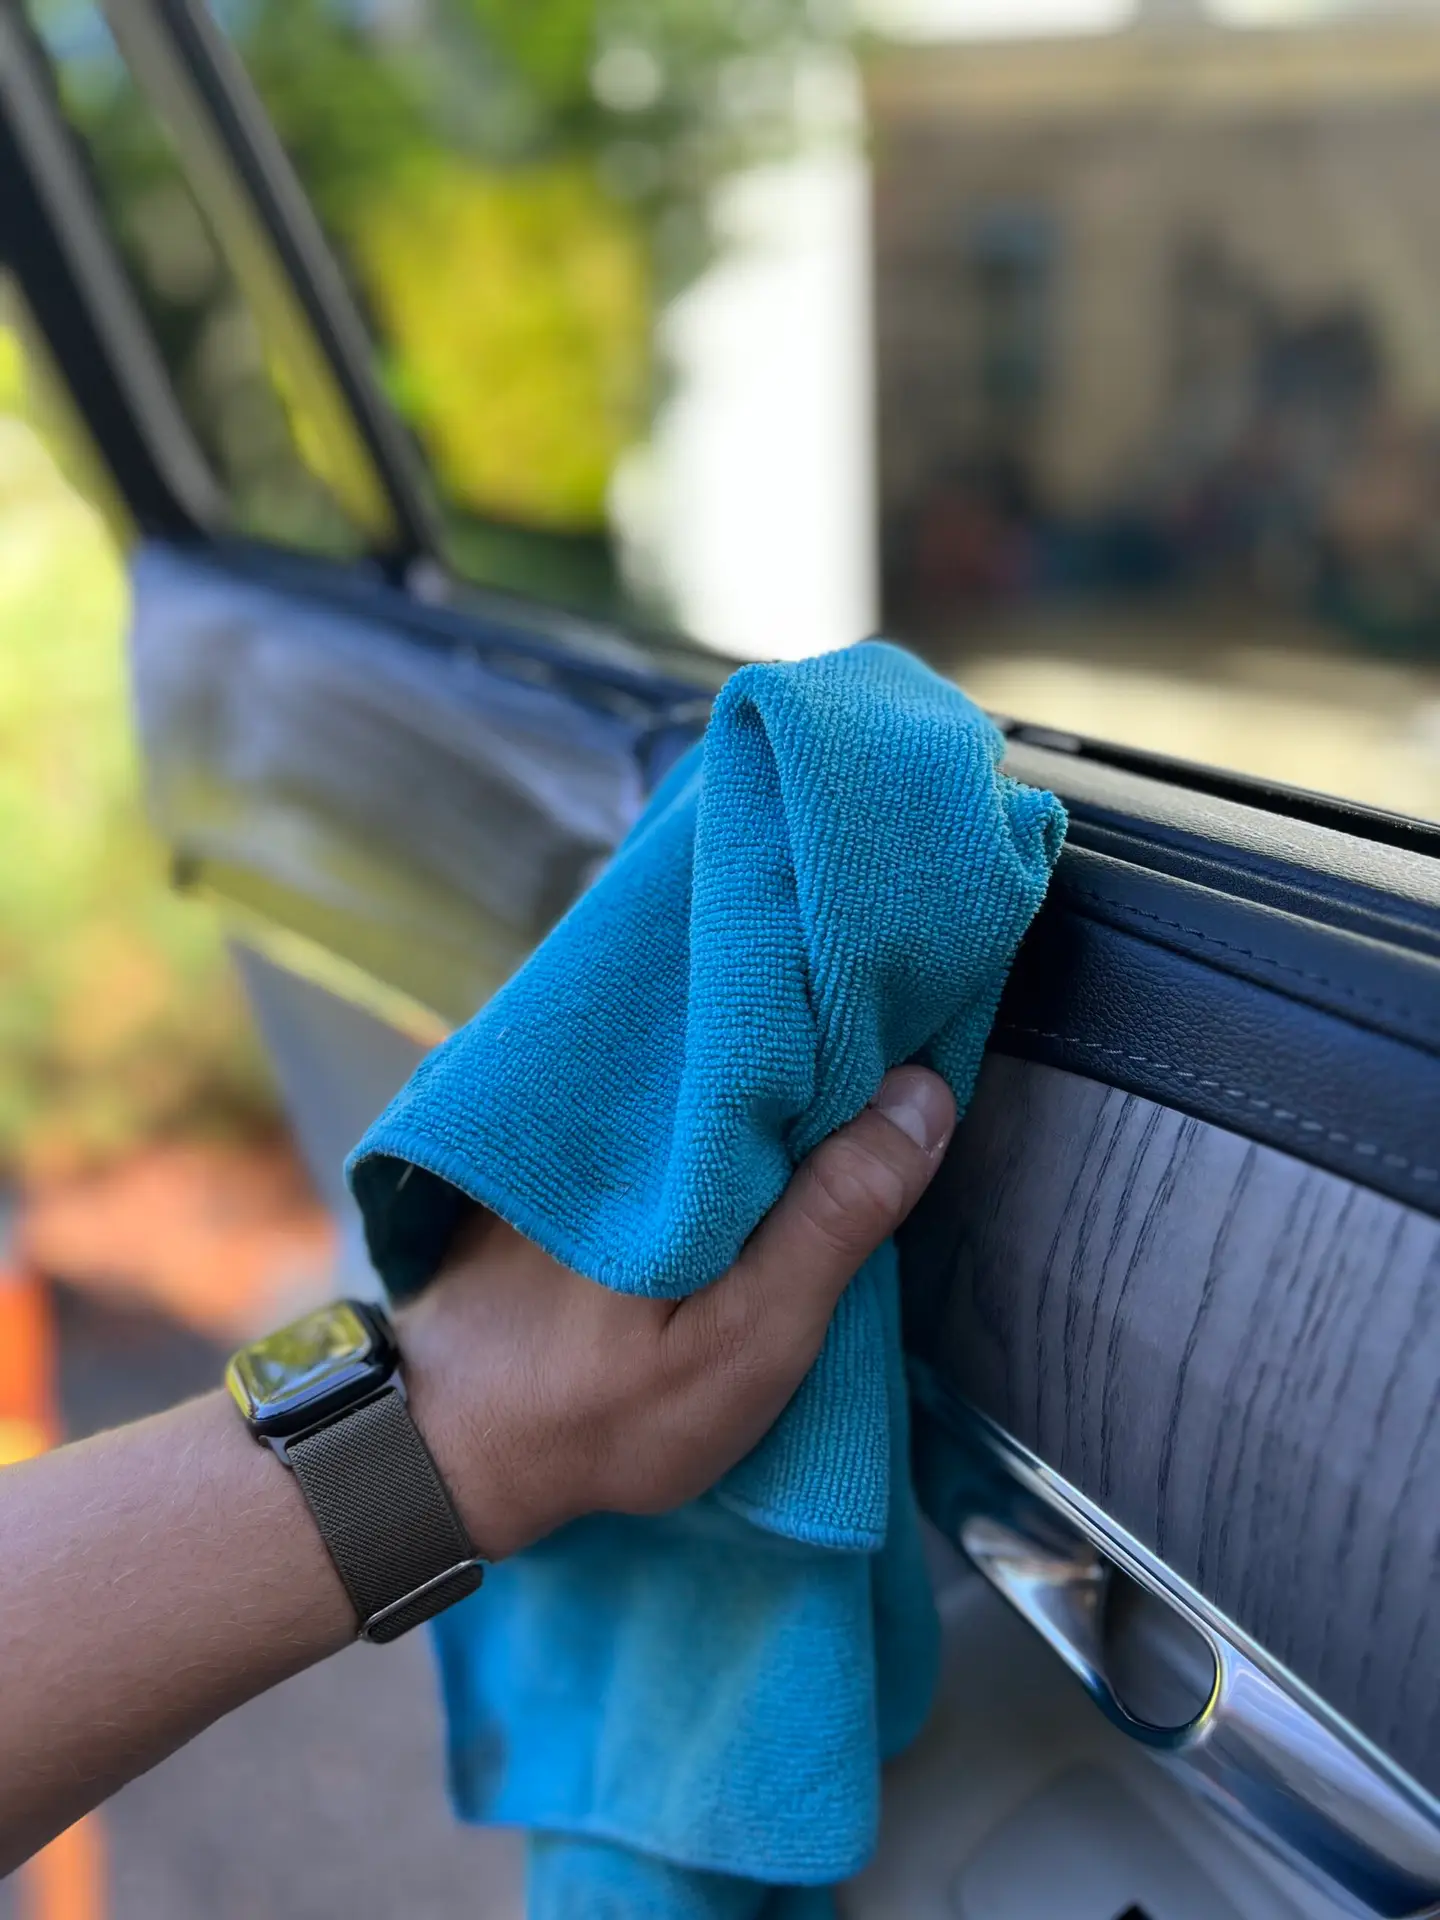 In the image, a person is meticulously wiping the interior surfaces of a car with a soft microfiber cloth. With focused attention, they glide the cloth over the dashboard, steering wheel, and center console, erasing dust and smudges with precision. The gentle motions reflect a commitment to achieving a spotless finish, enhancing the car's interior with a renewed shine.